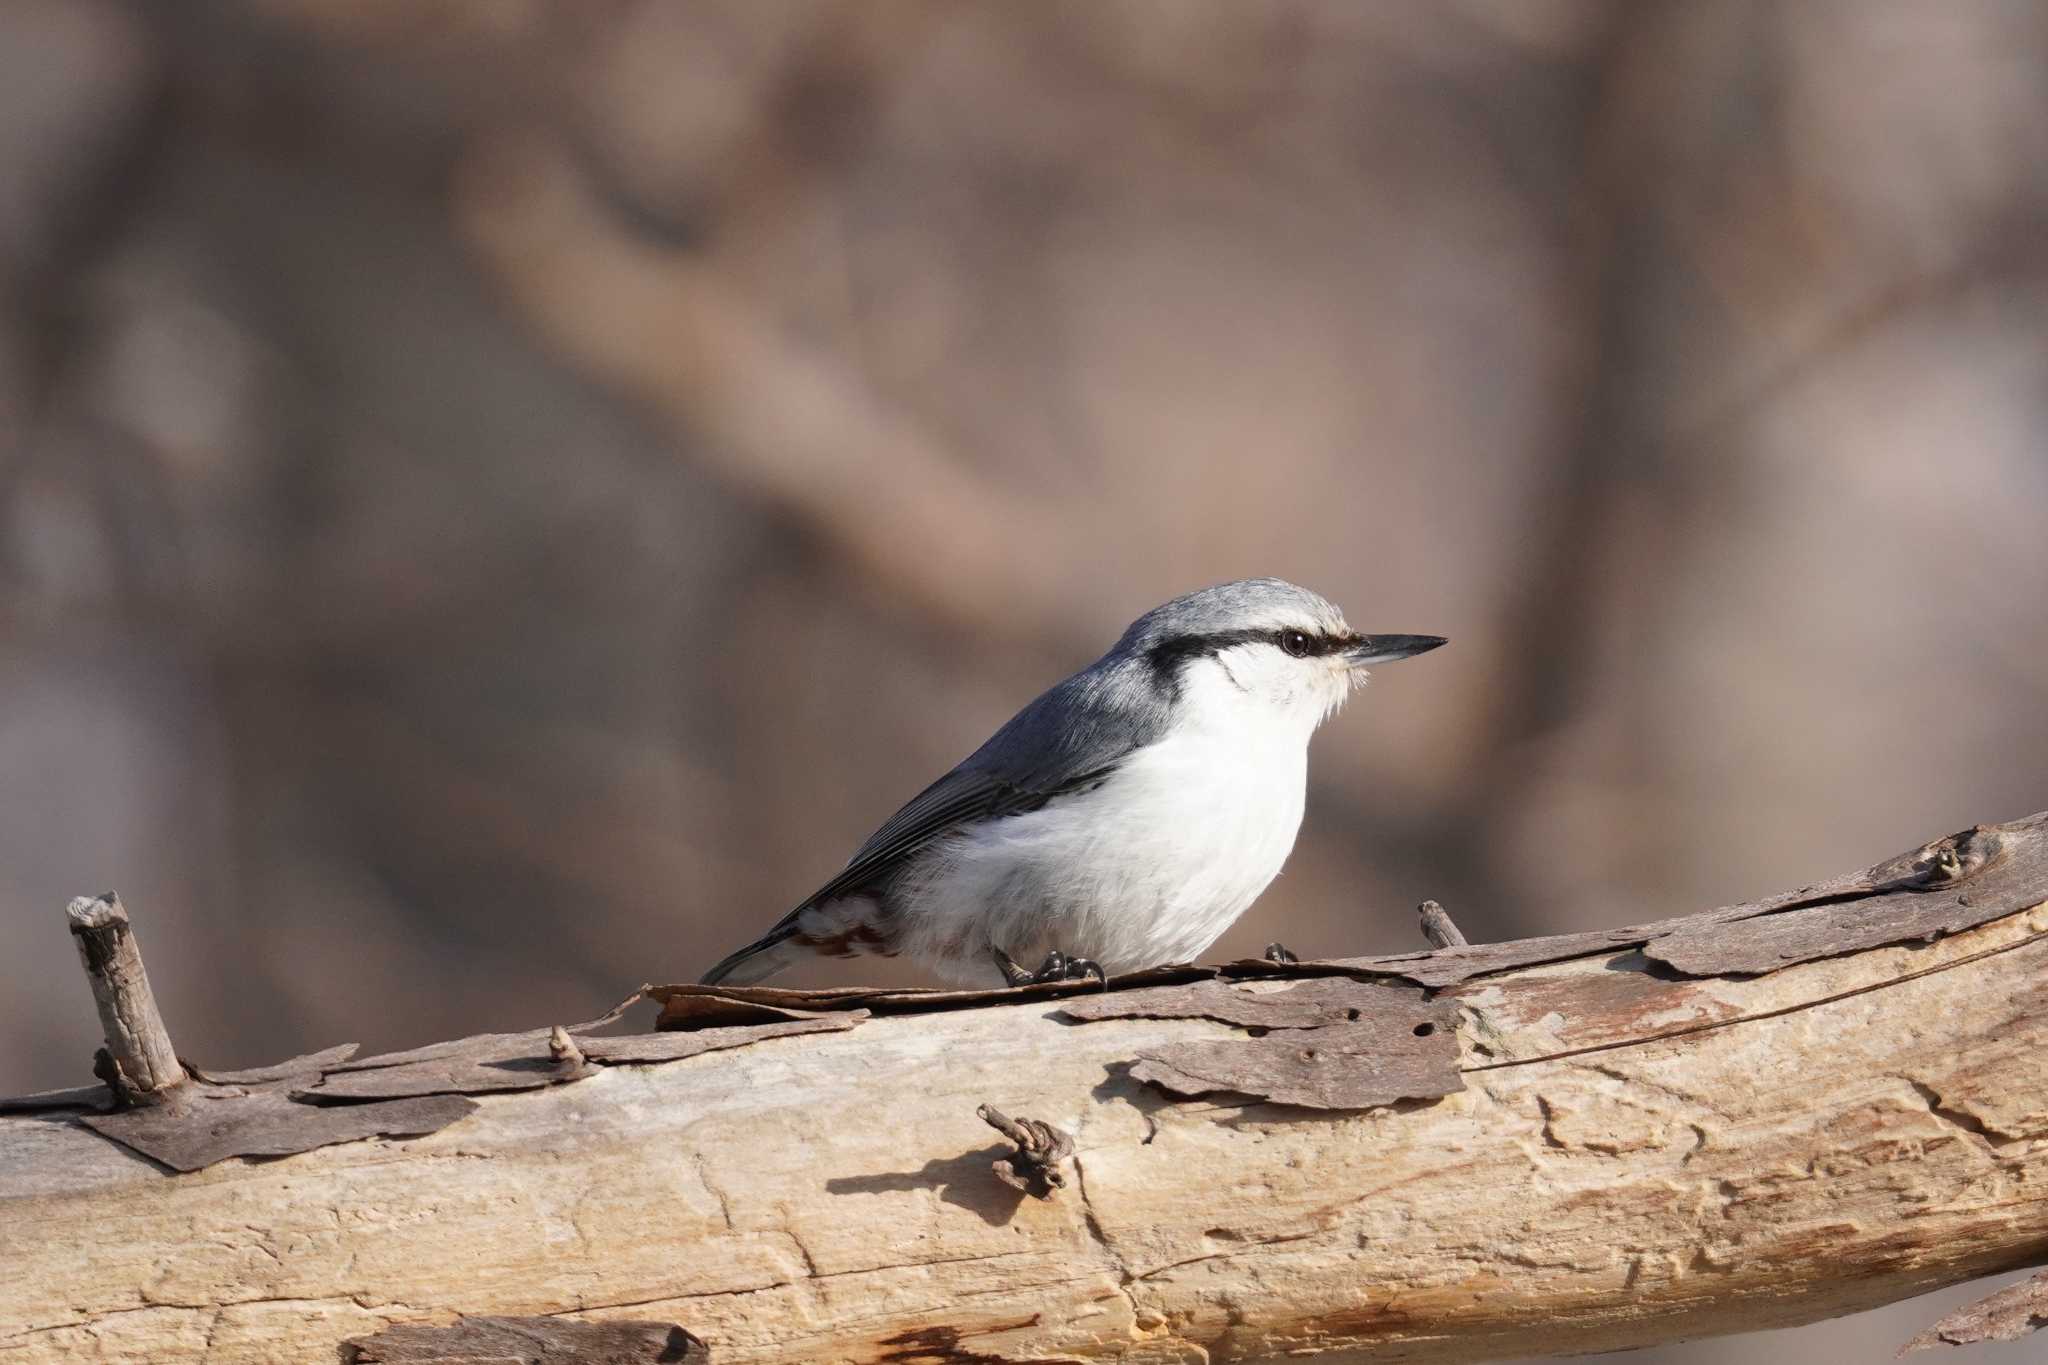 Photo of Eurasian Nuthatch(asiatica) at Asahiyama Memorial Park by くまちん